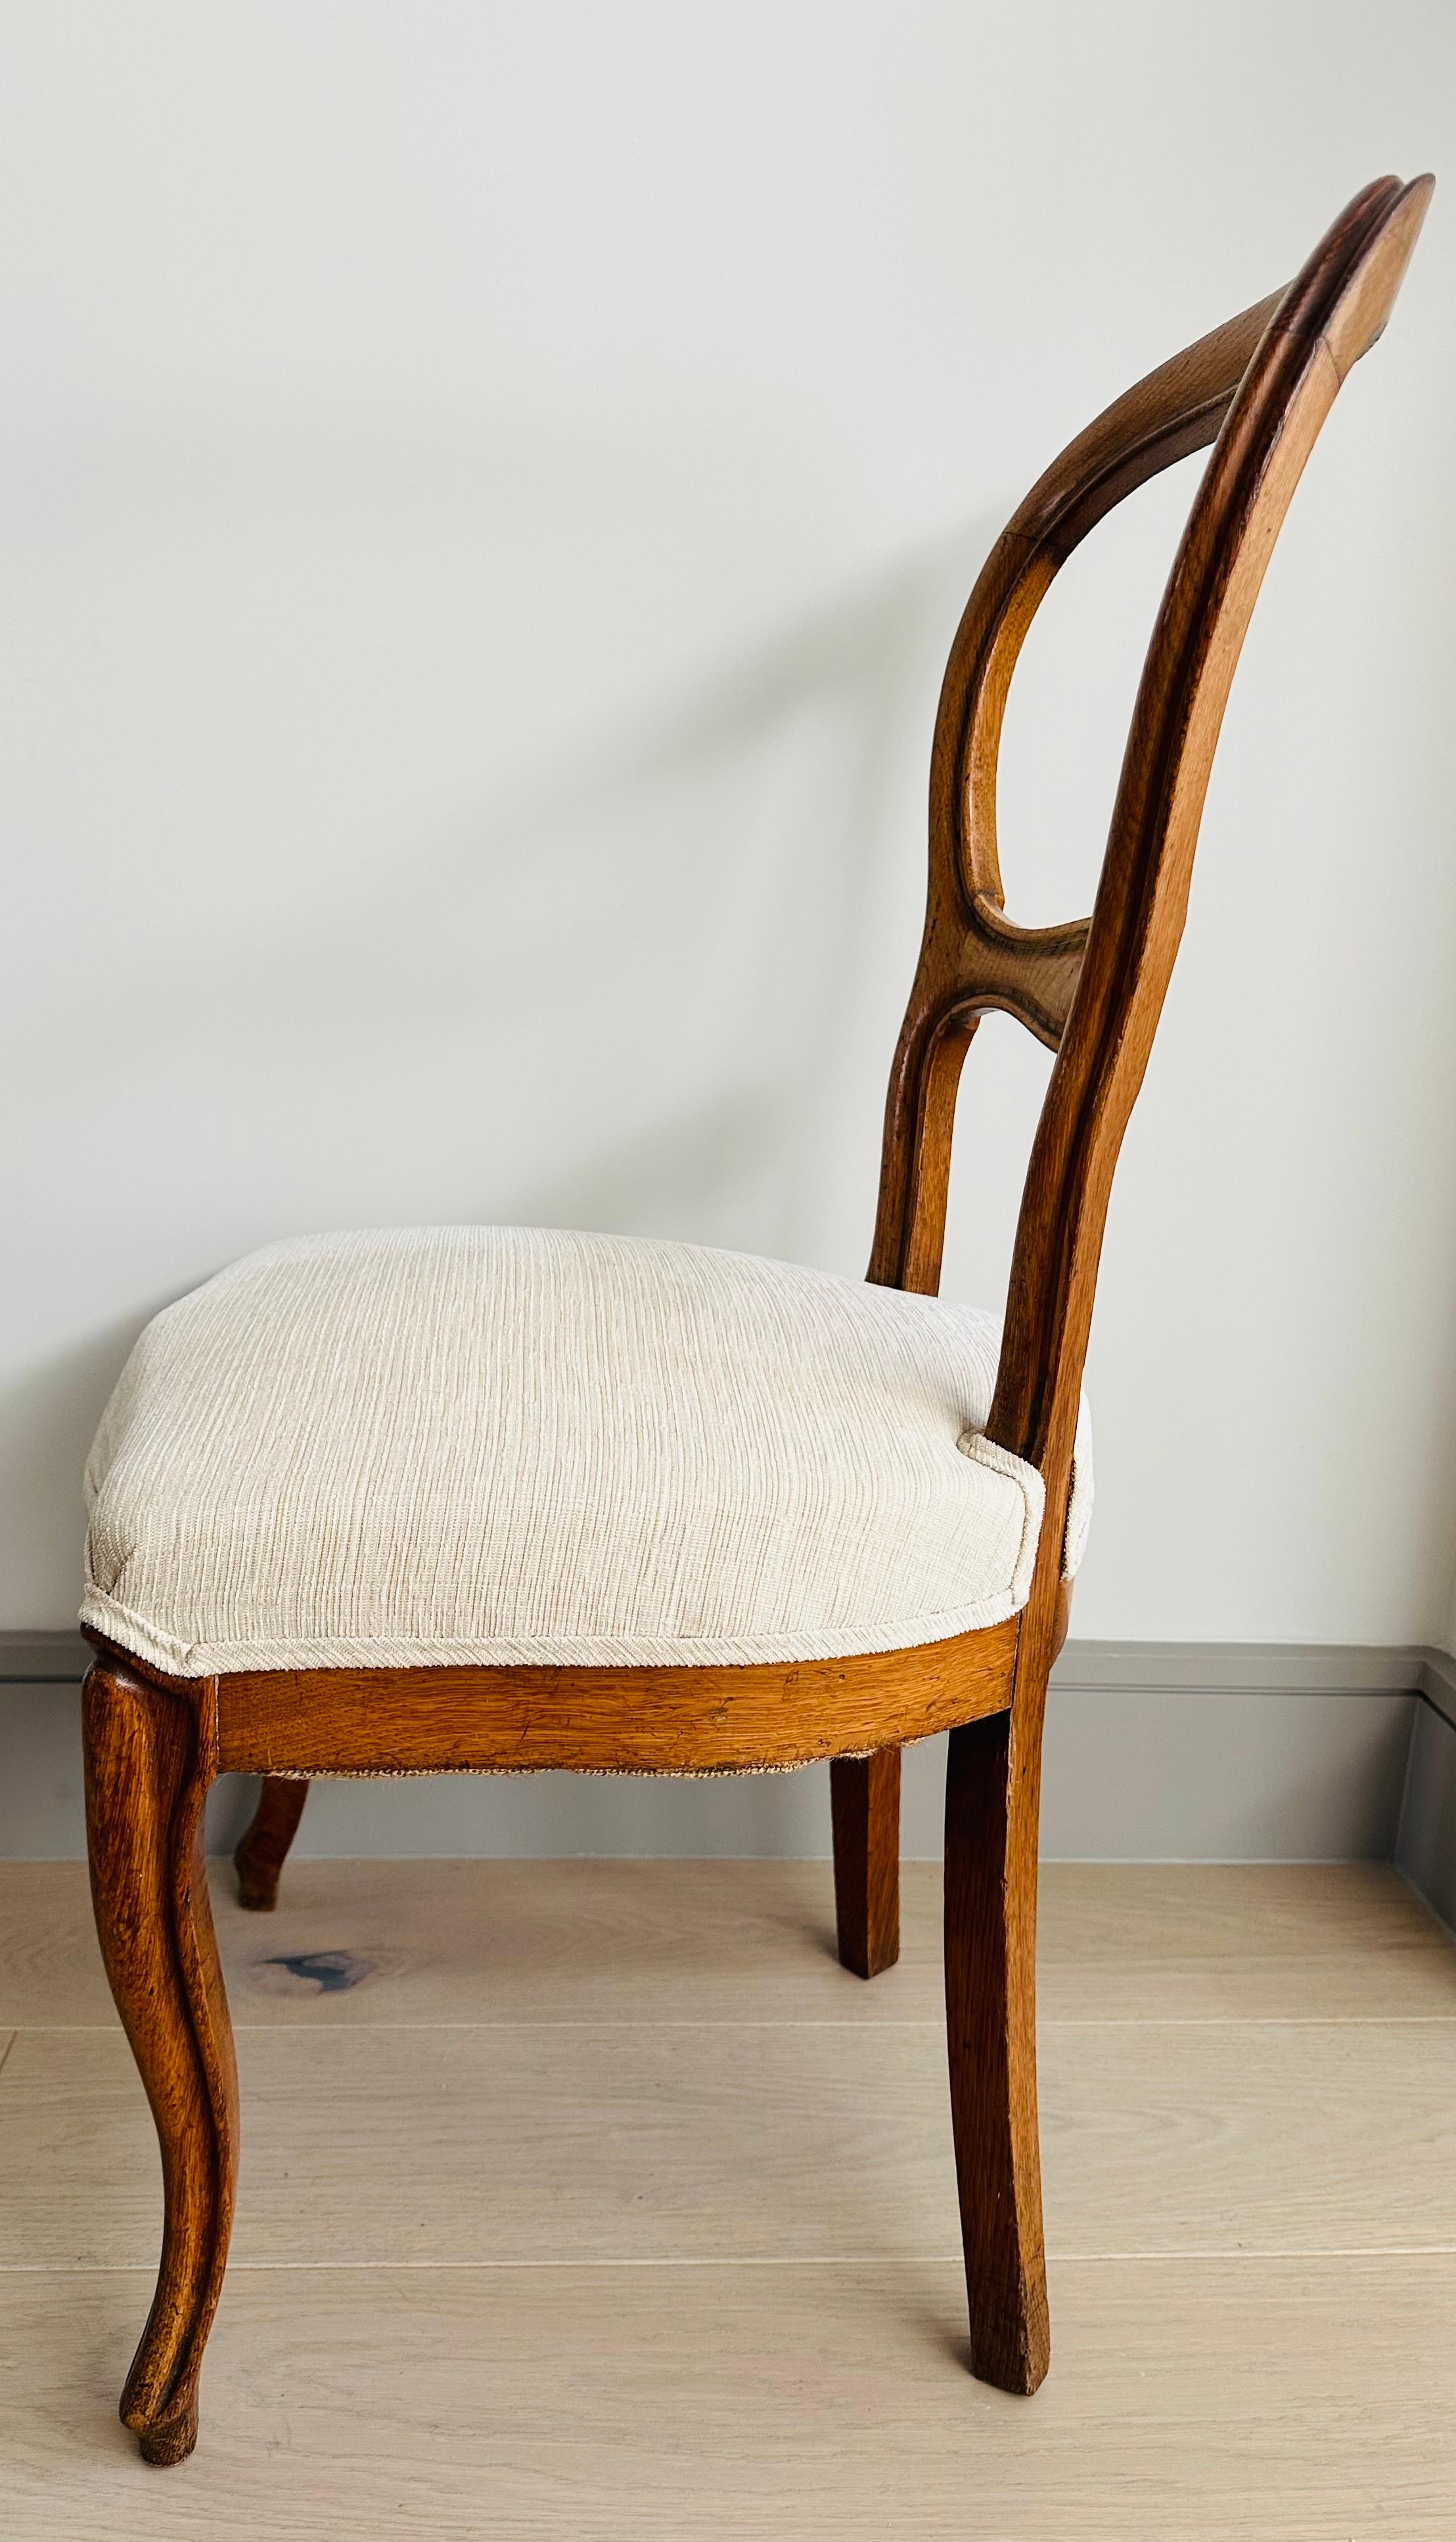 Circa 1900s English Oak Balloon Back Dining or Side Chair Newly Reupholstered  For Sale 3